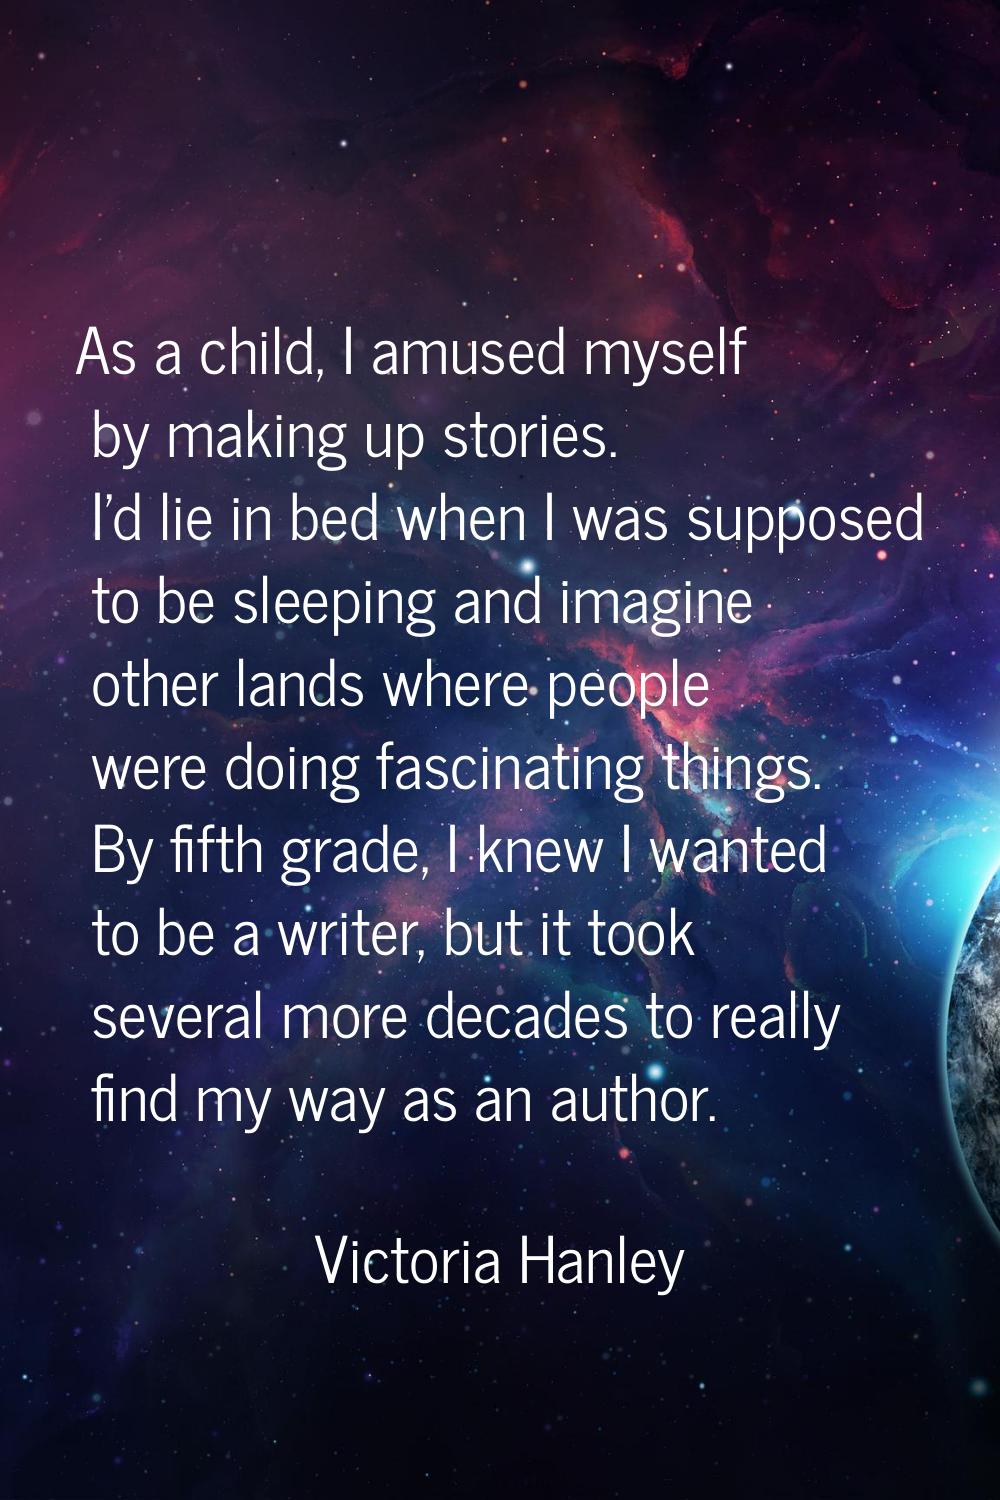 As a child, I amused myself by making up stories. I'd lie in bed when I was supposed to be sleeping